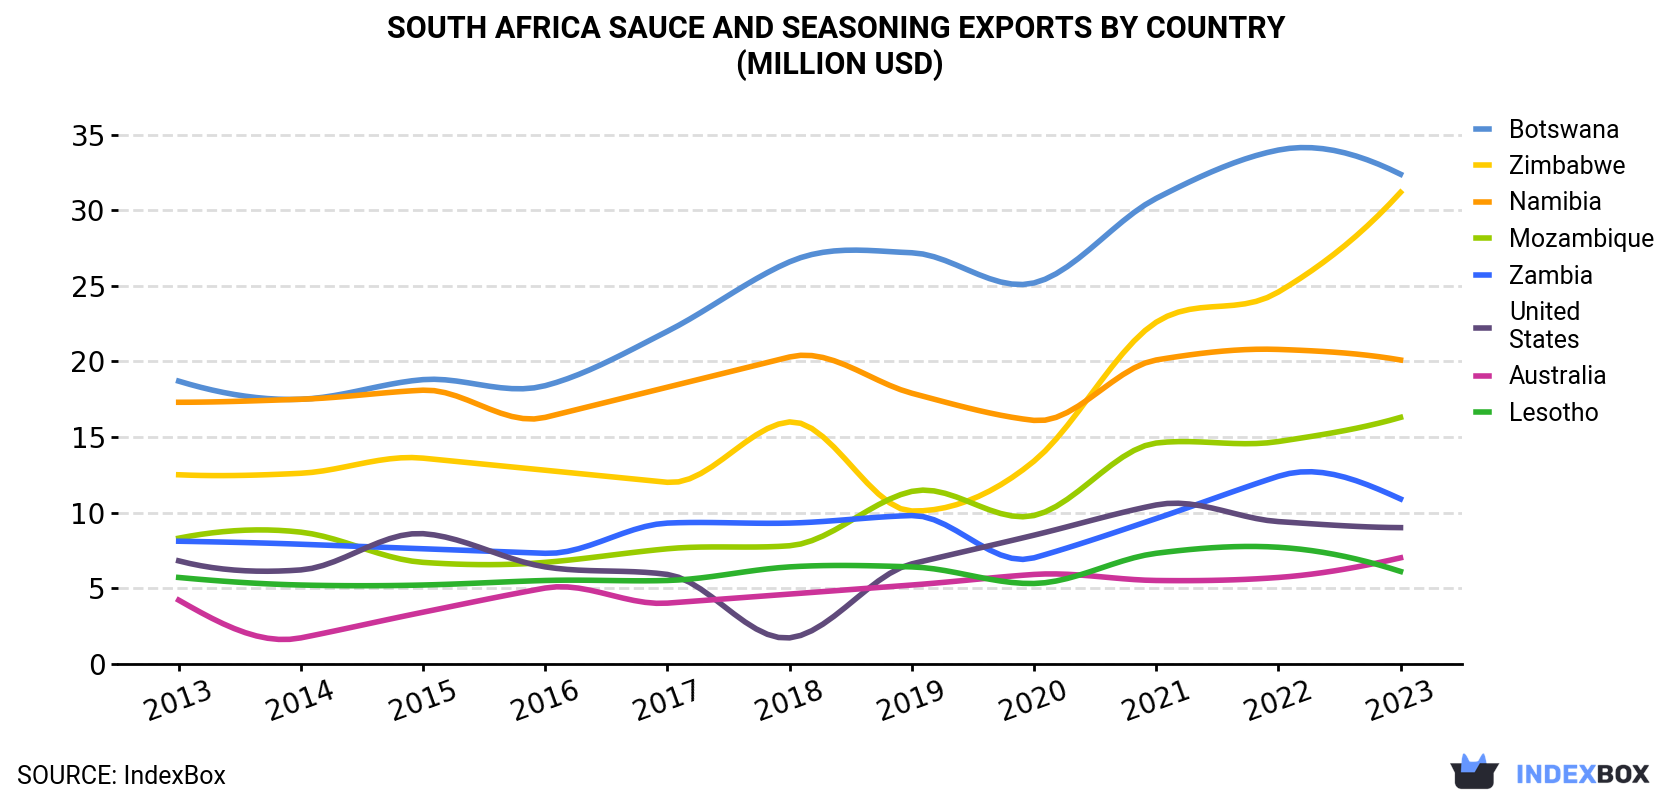 South Africa Sauce and Seasoning Exports By Country (Million USD)